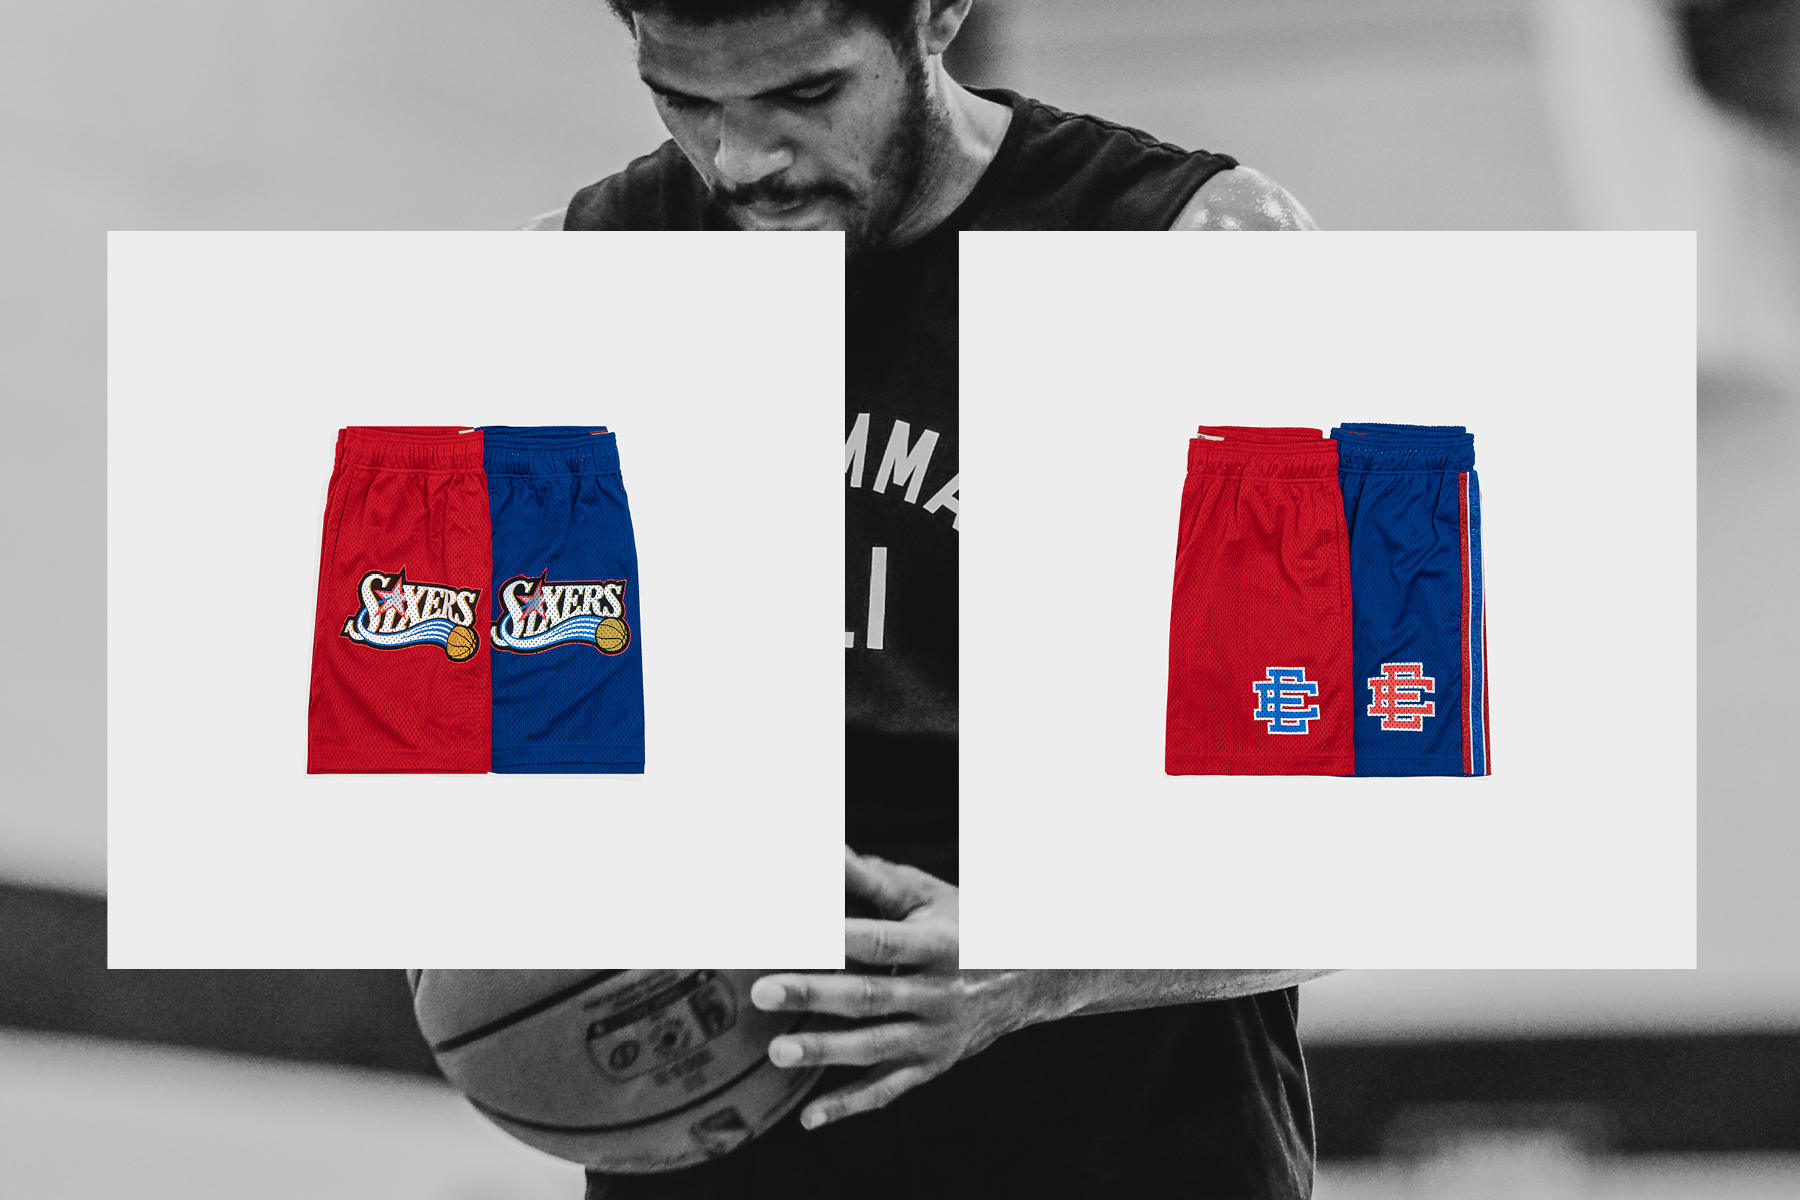 Best Style Releases This Week: Sixers x Lapstone & Hammer